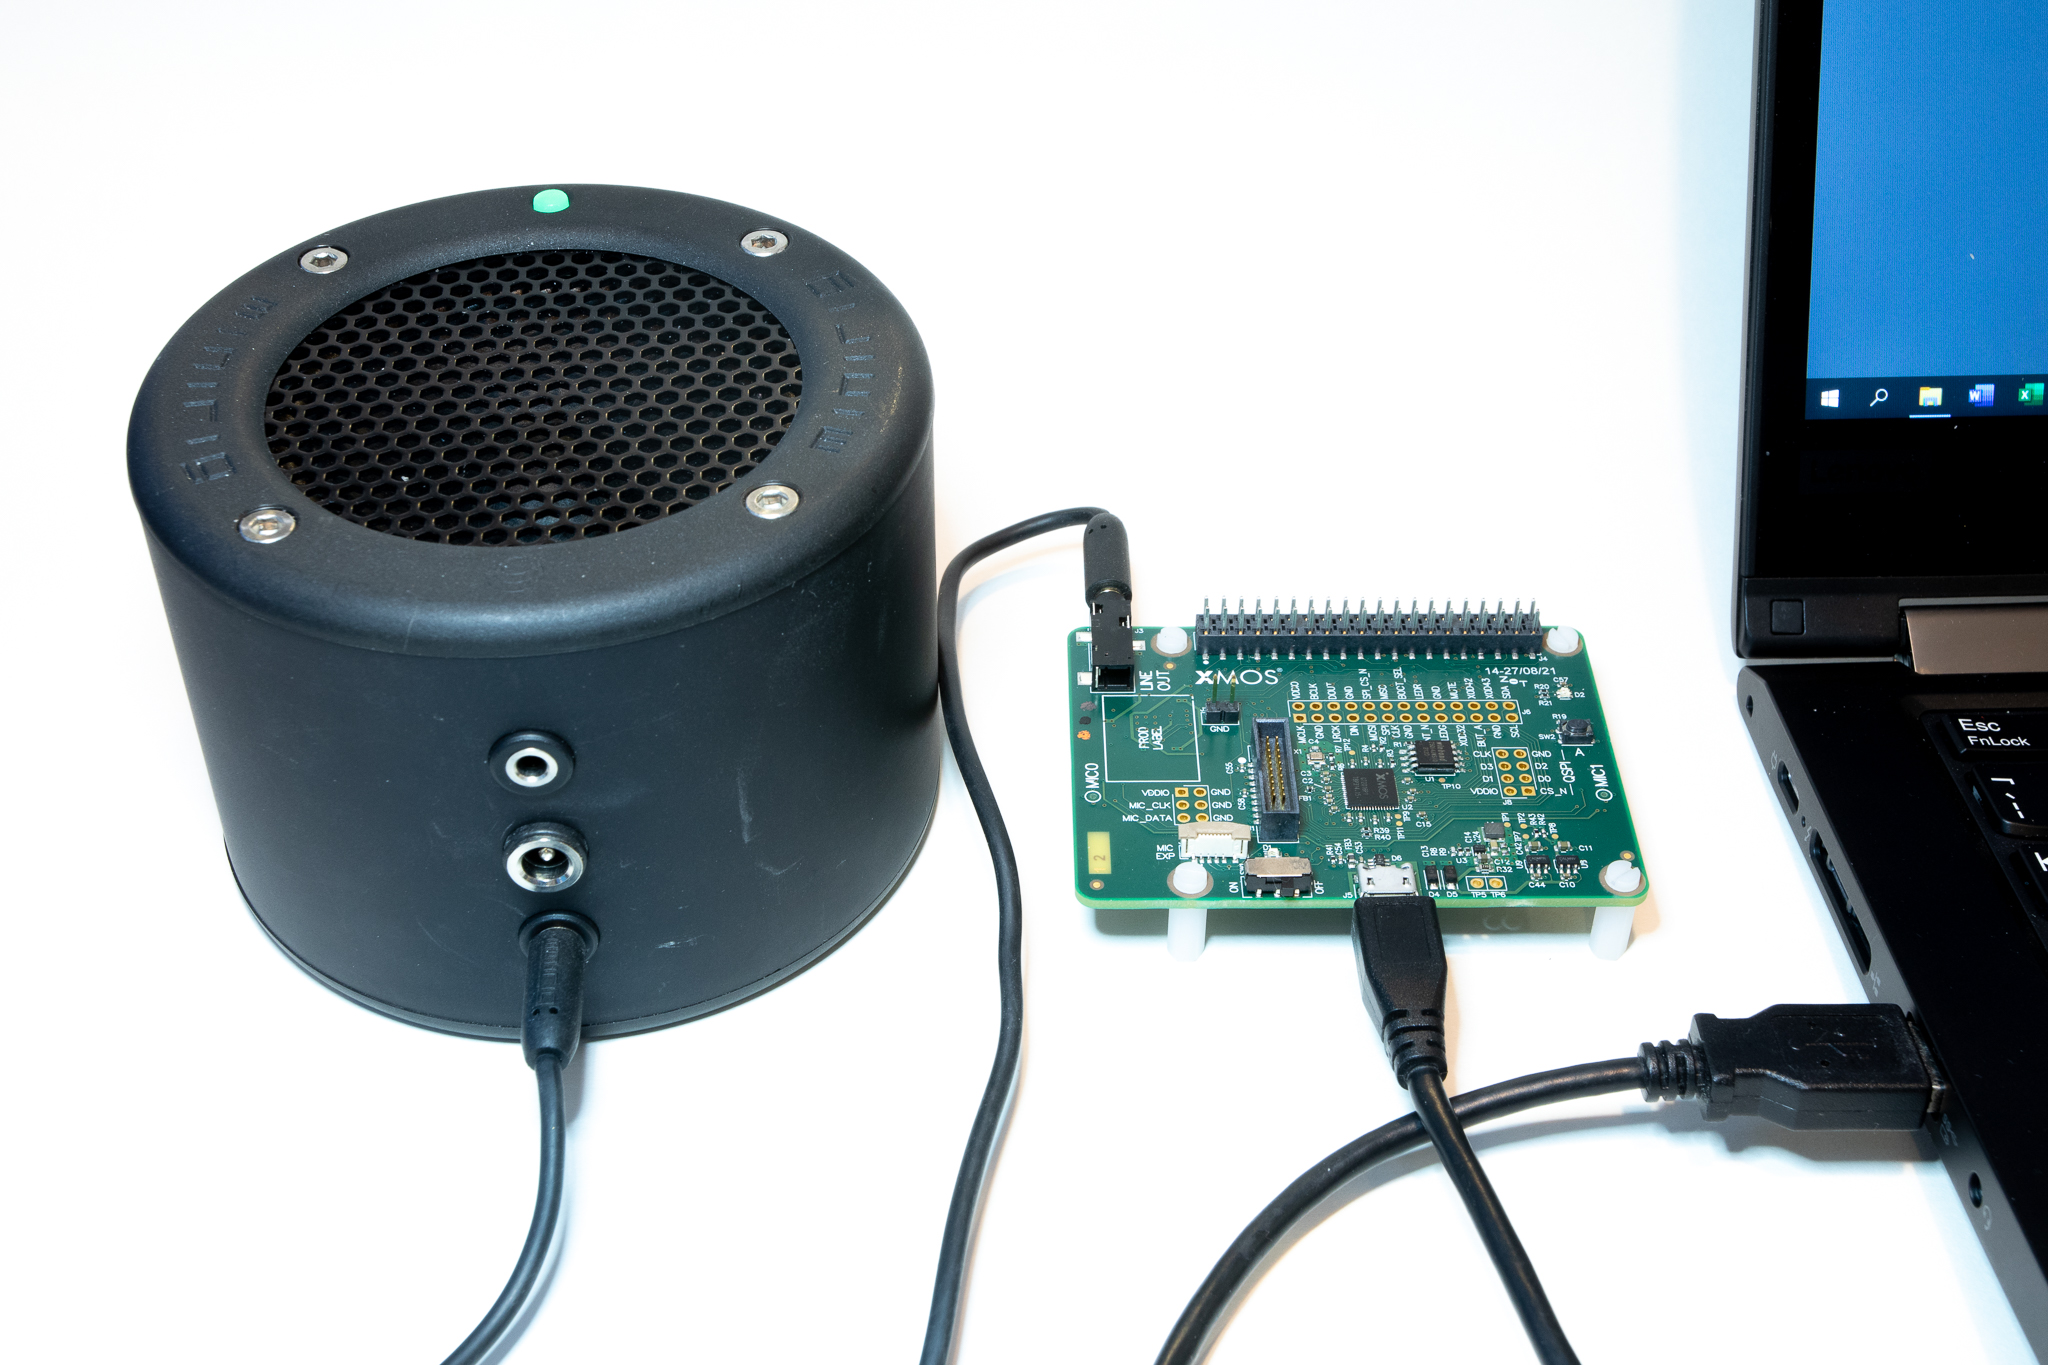 XK-VOICE-L71 connected to powered speakers and host device